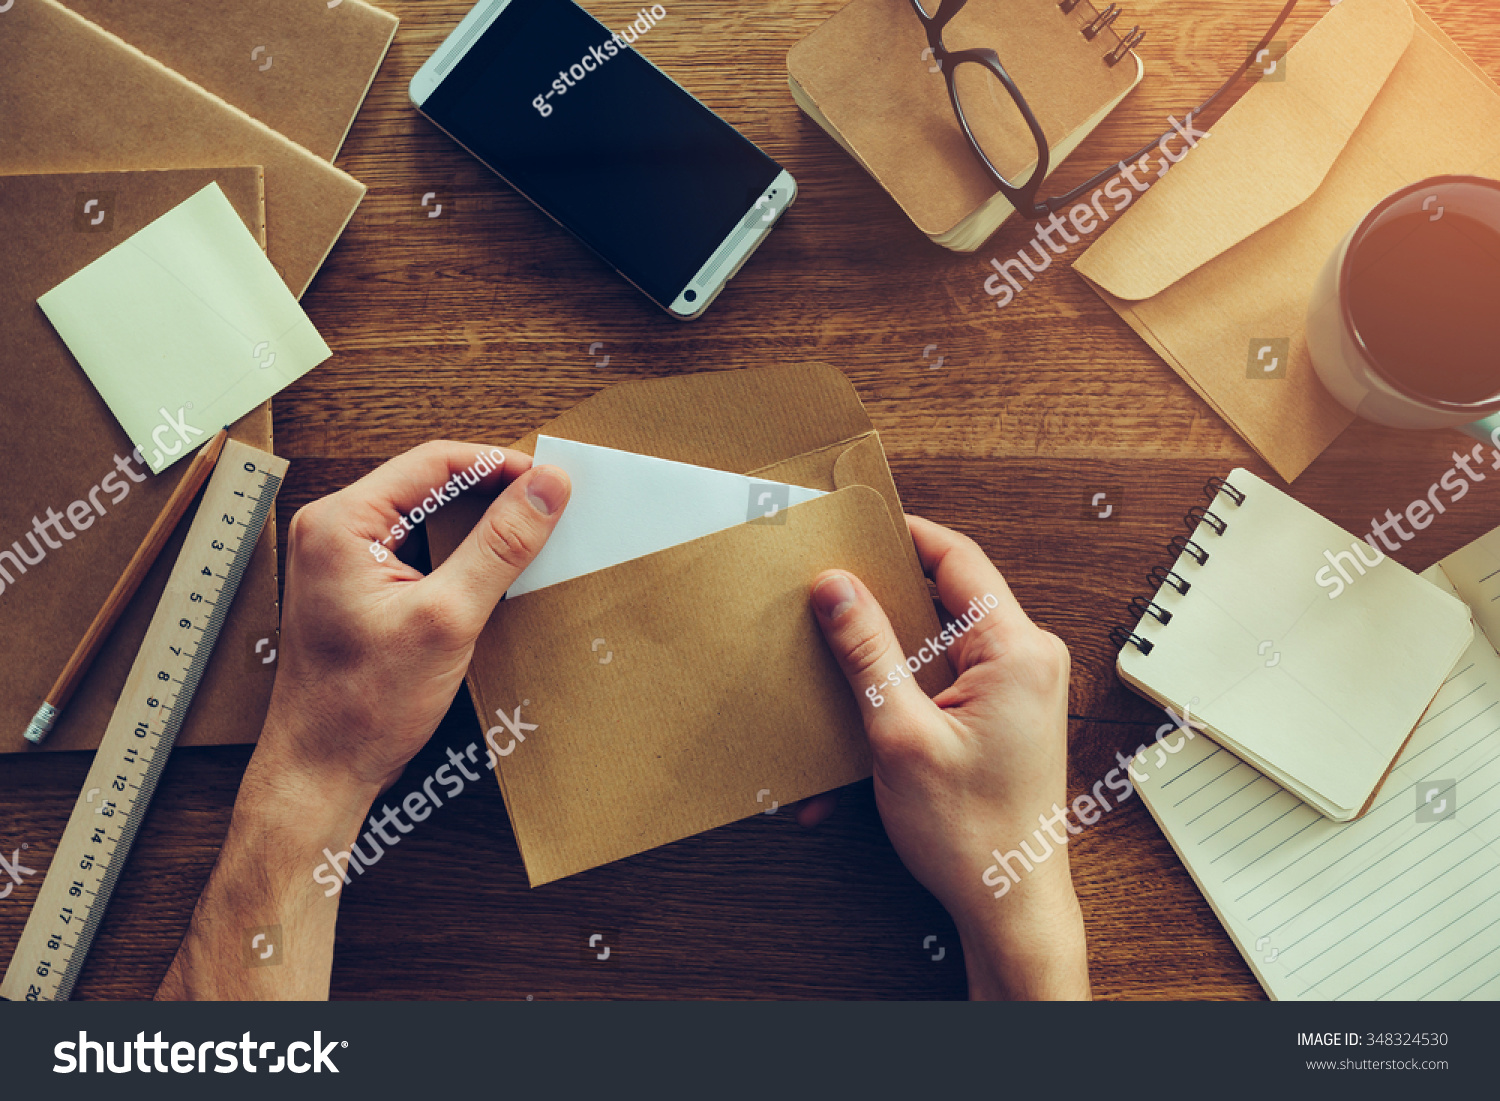 Opening envelope. Close-up top view of male hands opening envelope over wooden desk with different chancellery stuff laying on it #348324530